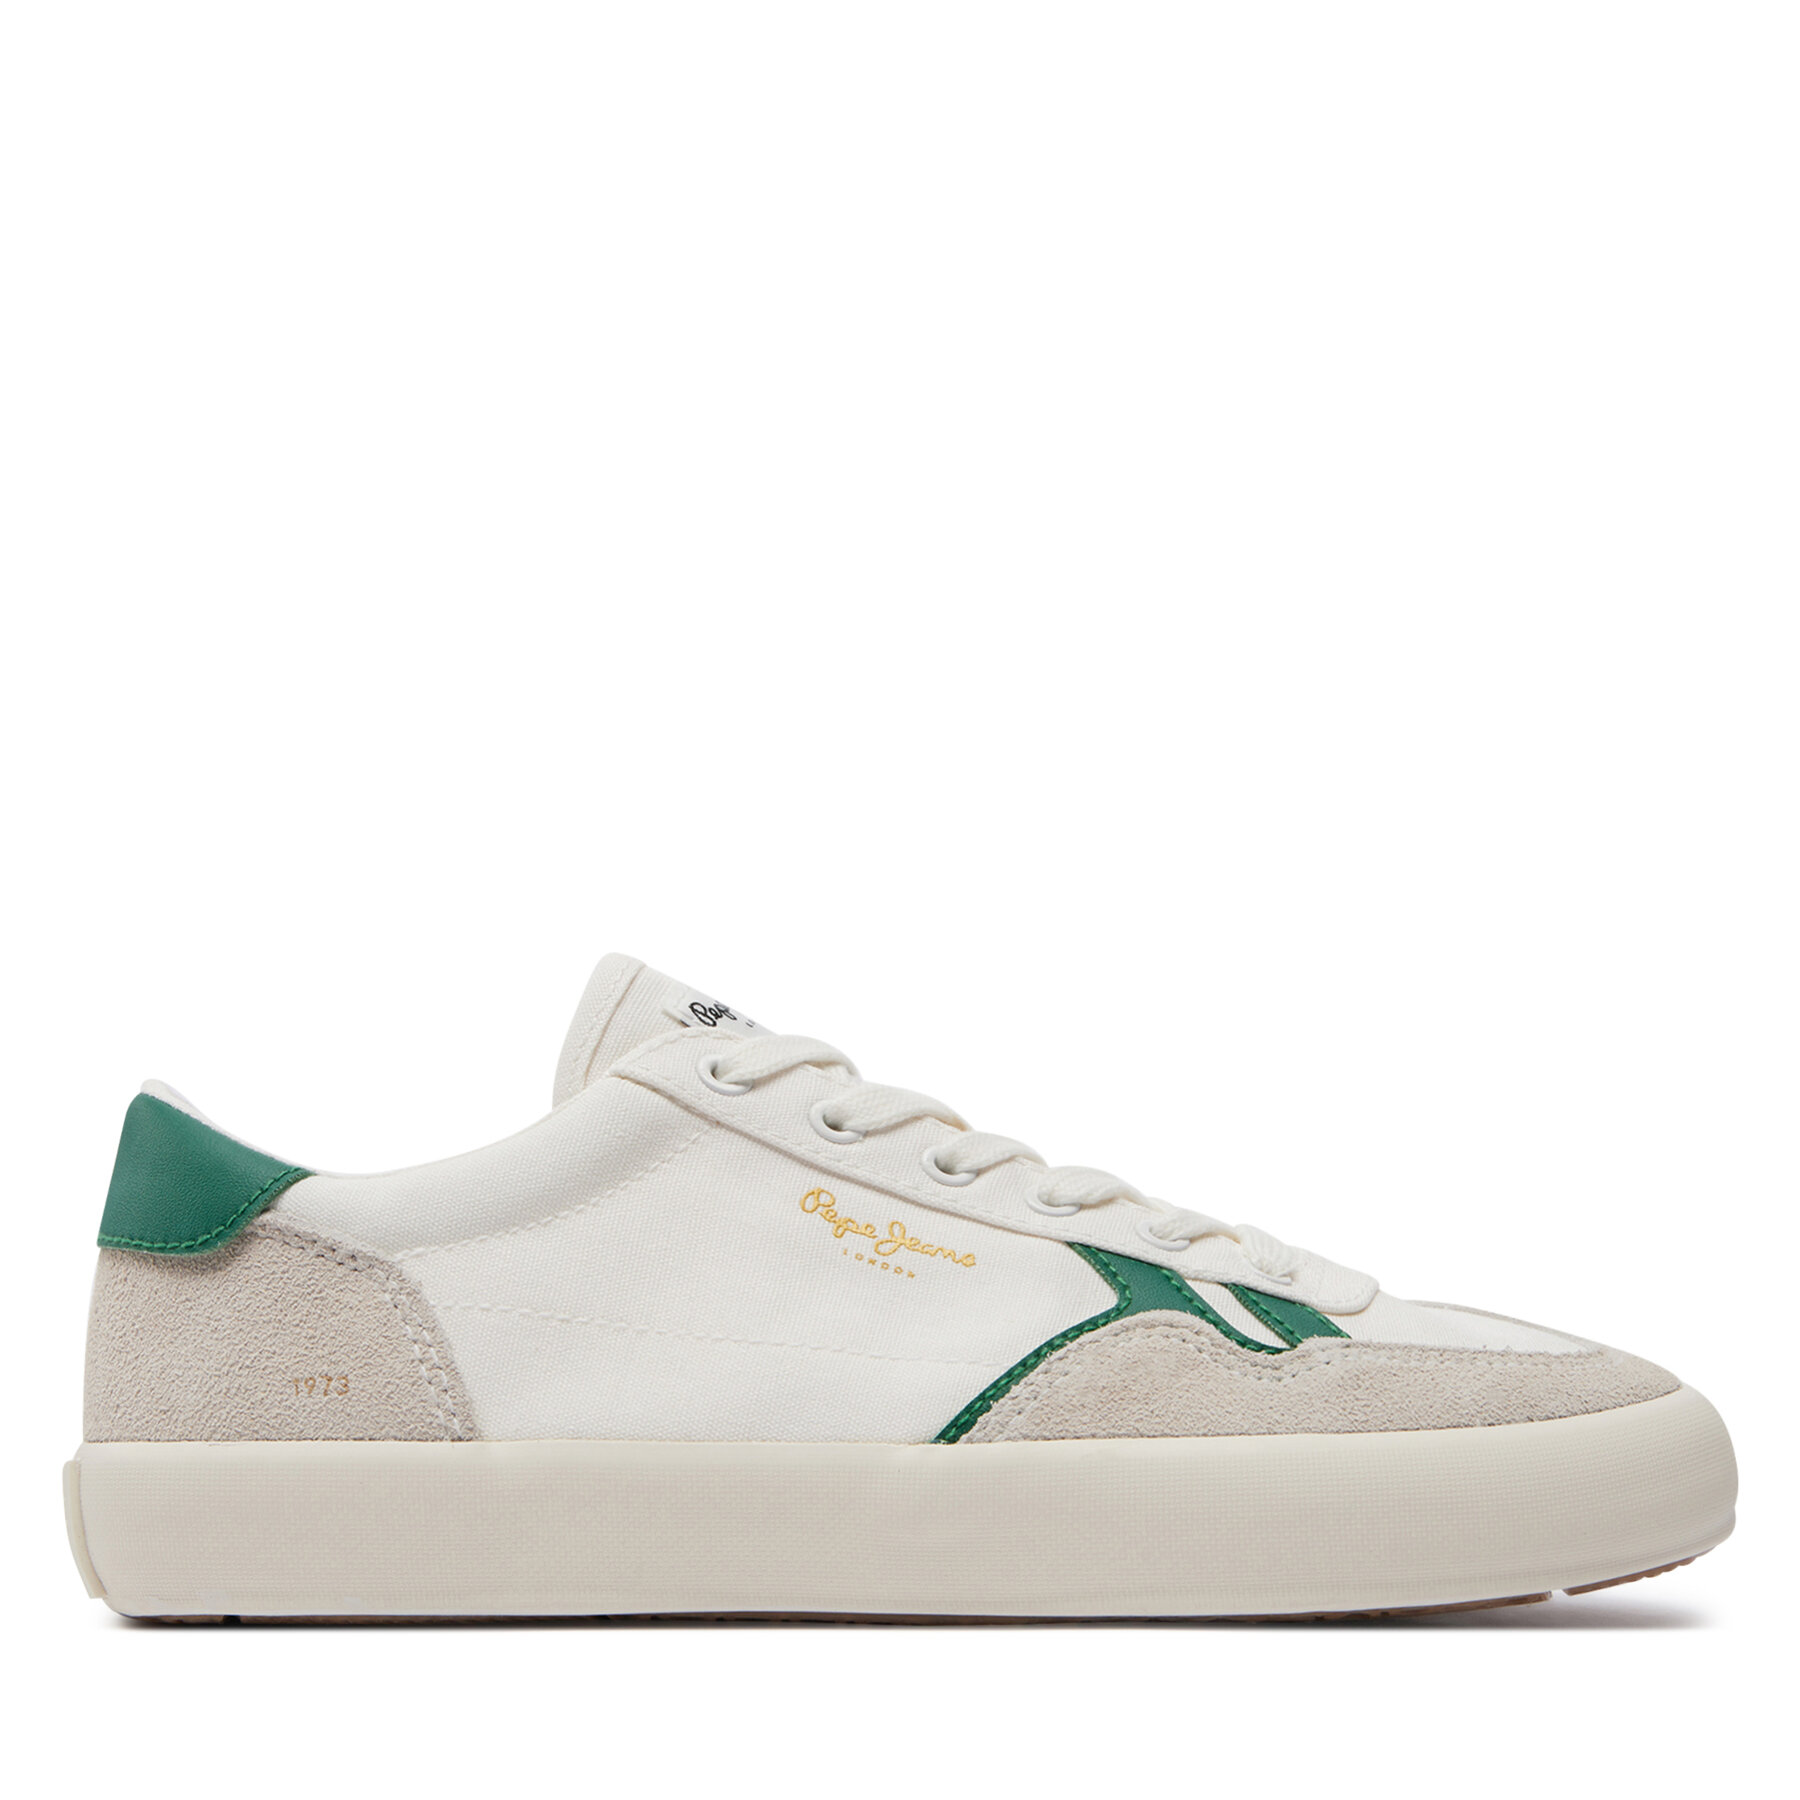 Sneakers Pepe Jeans Travis Brit M PMS31038 Off White 803 von Pepe Jeans